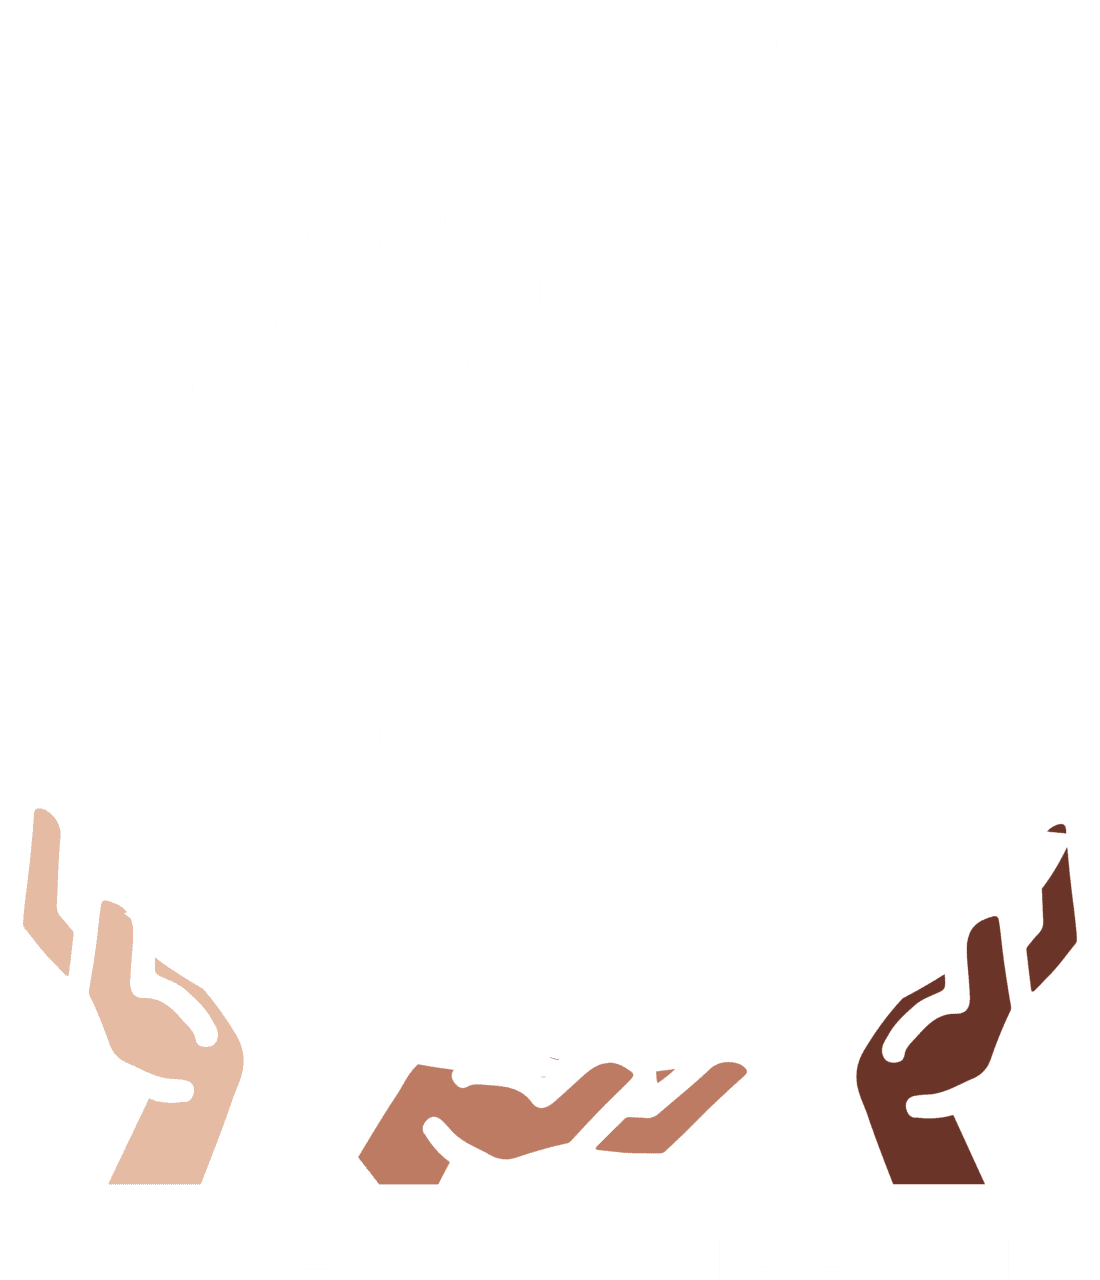 I Believe - United In Mission